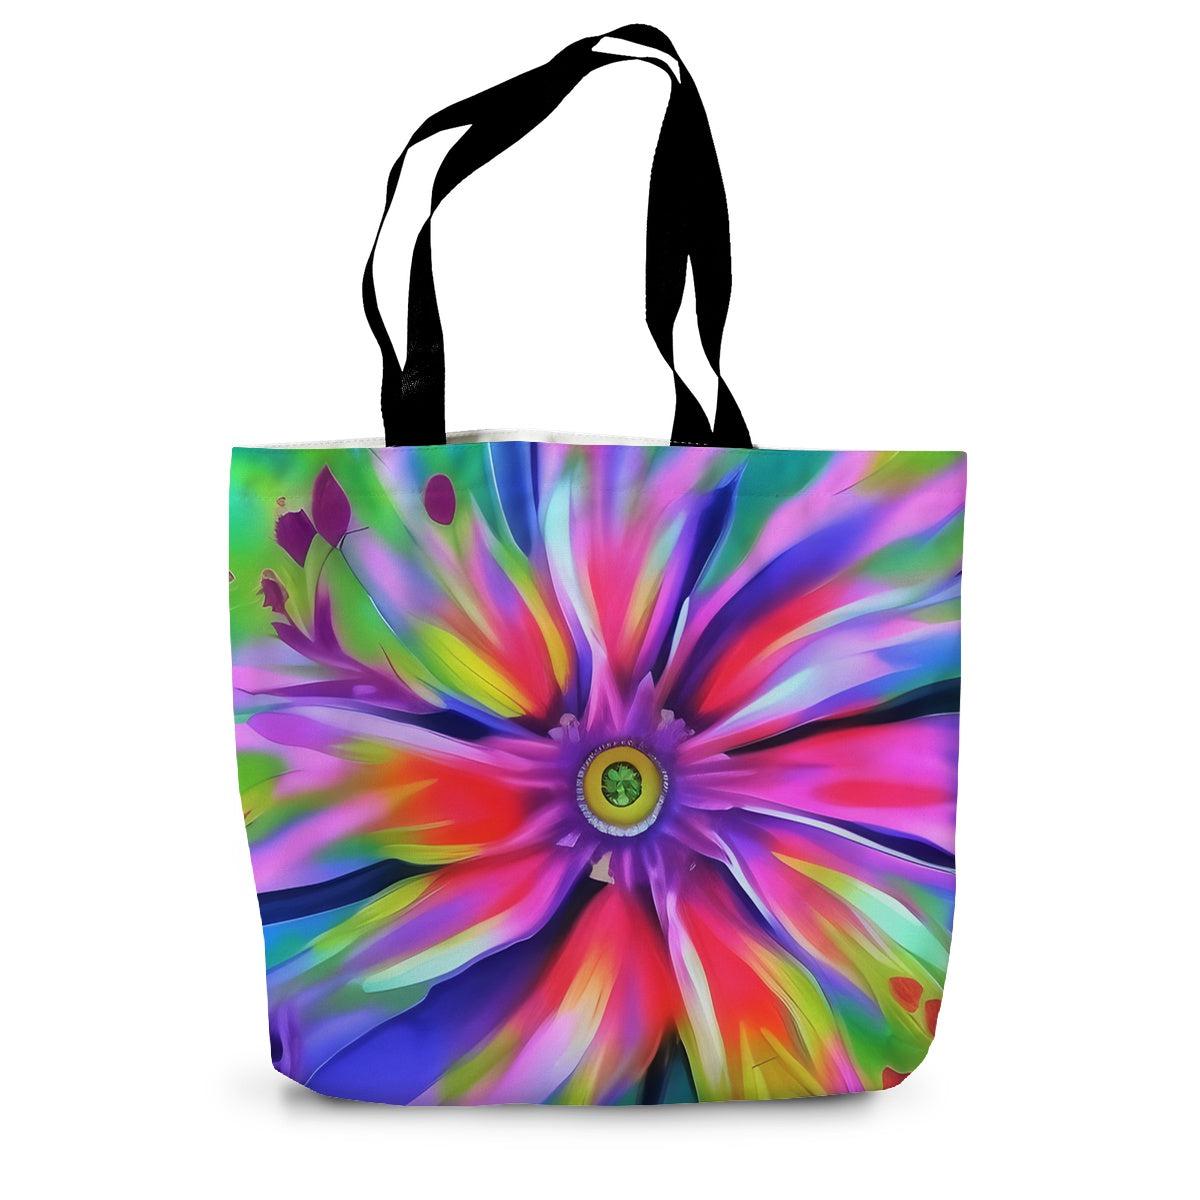 Surreal Flower Canvas Tote Bag